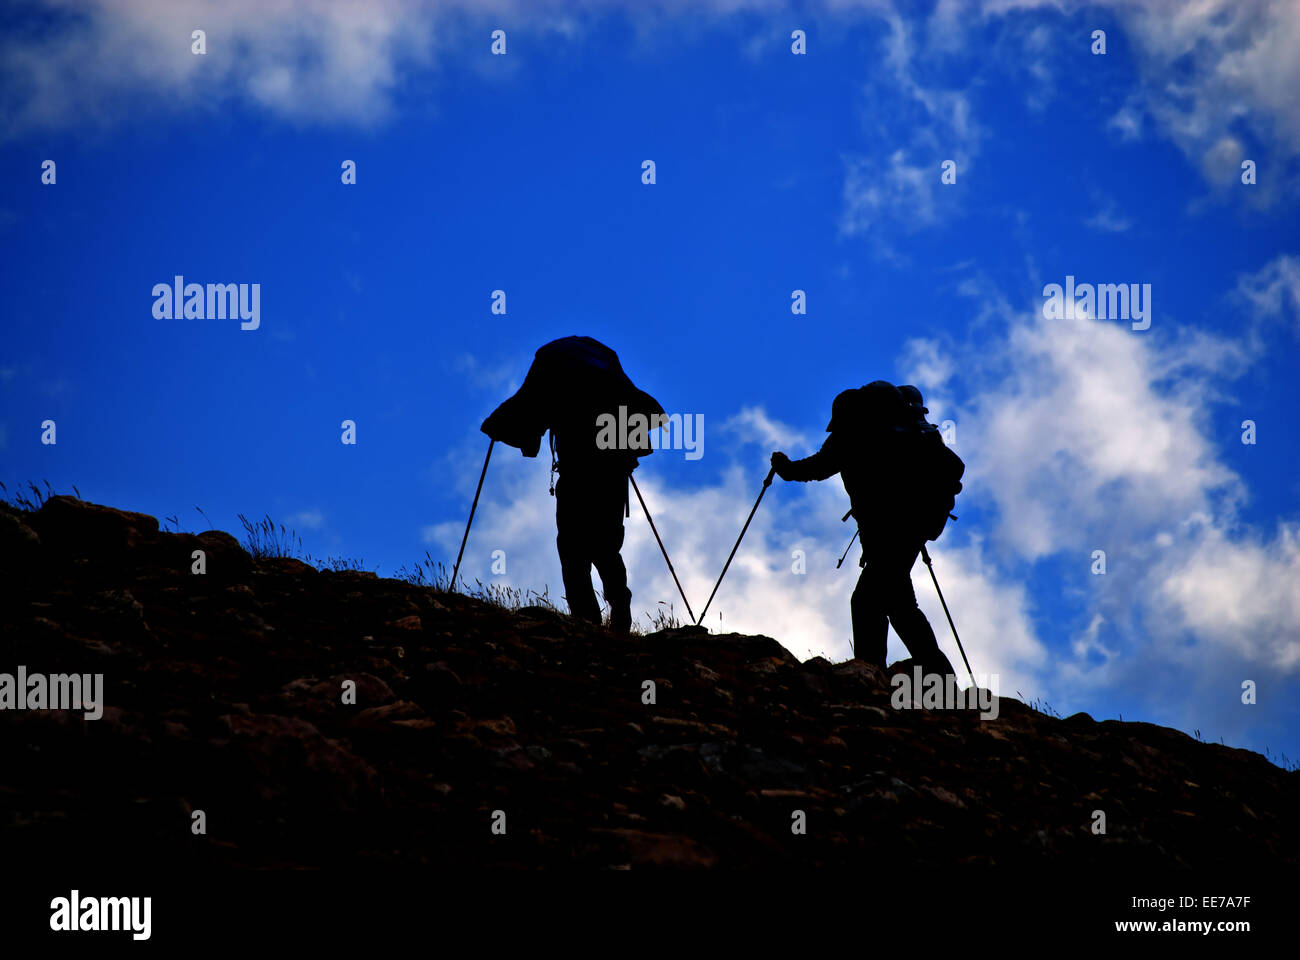 Silhouette of people hiking on mountainside with clouds in sky Stock Photo